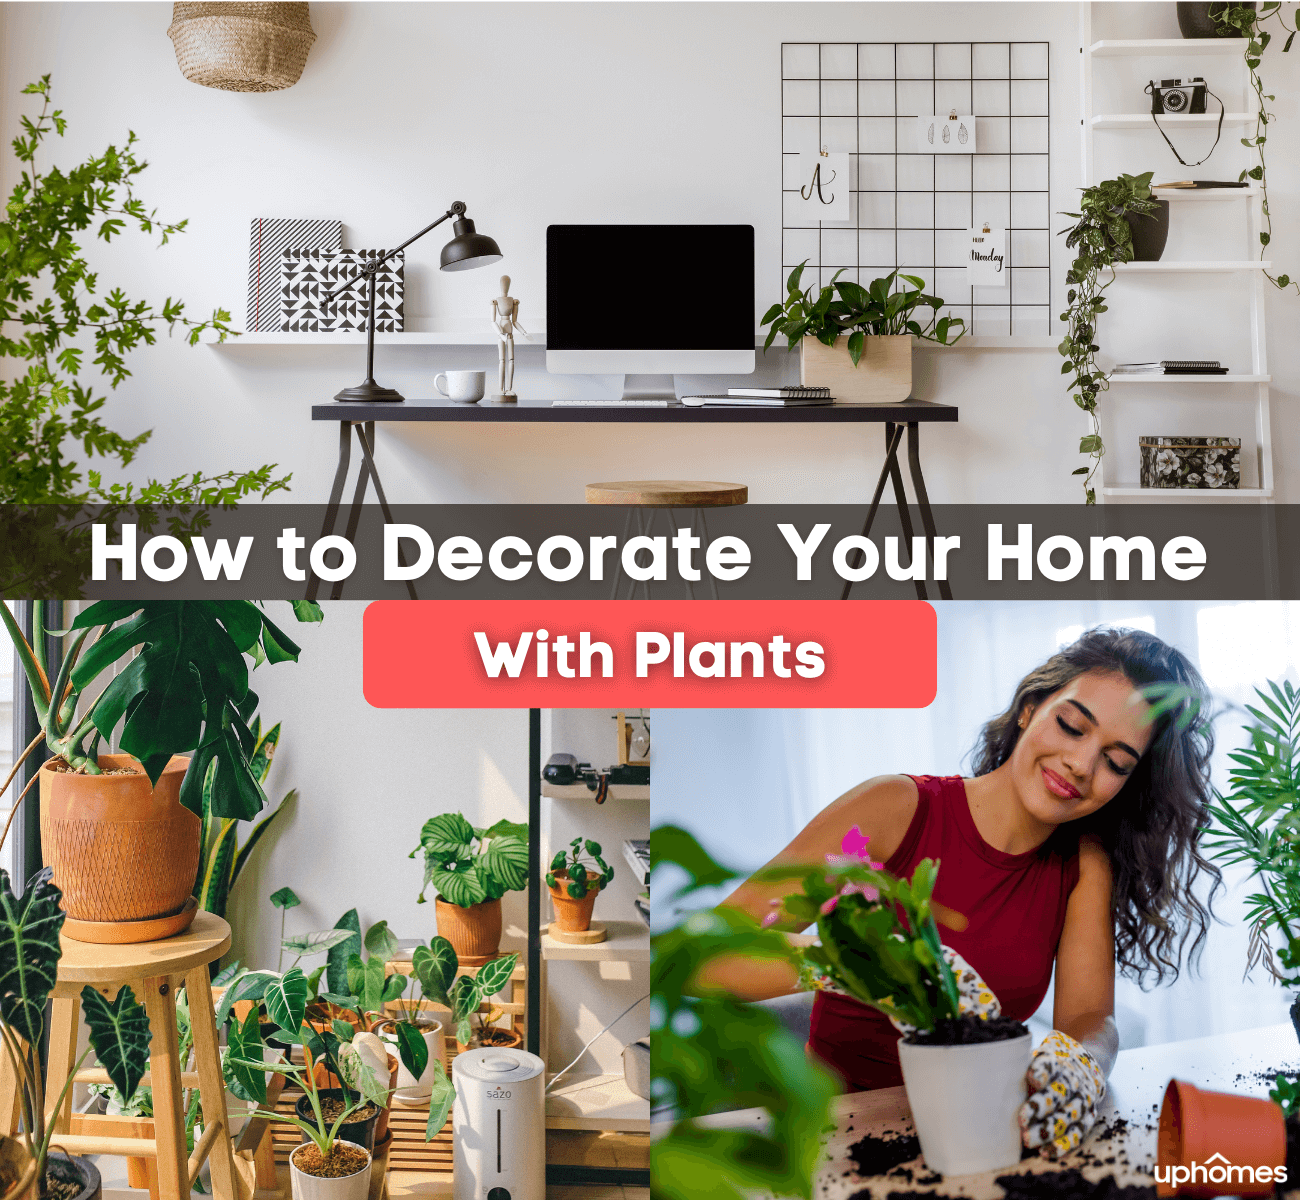 HOW TO DECORATE ANY ROOM - Easy Step By Step Guide - YouTube